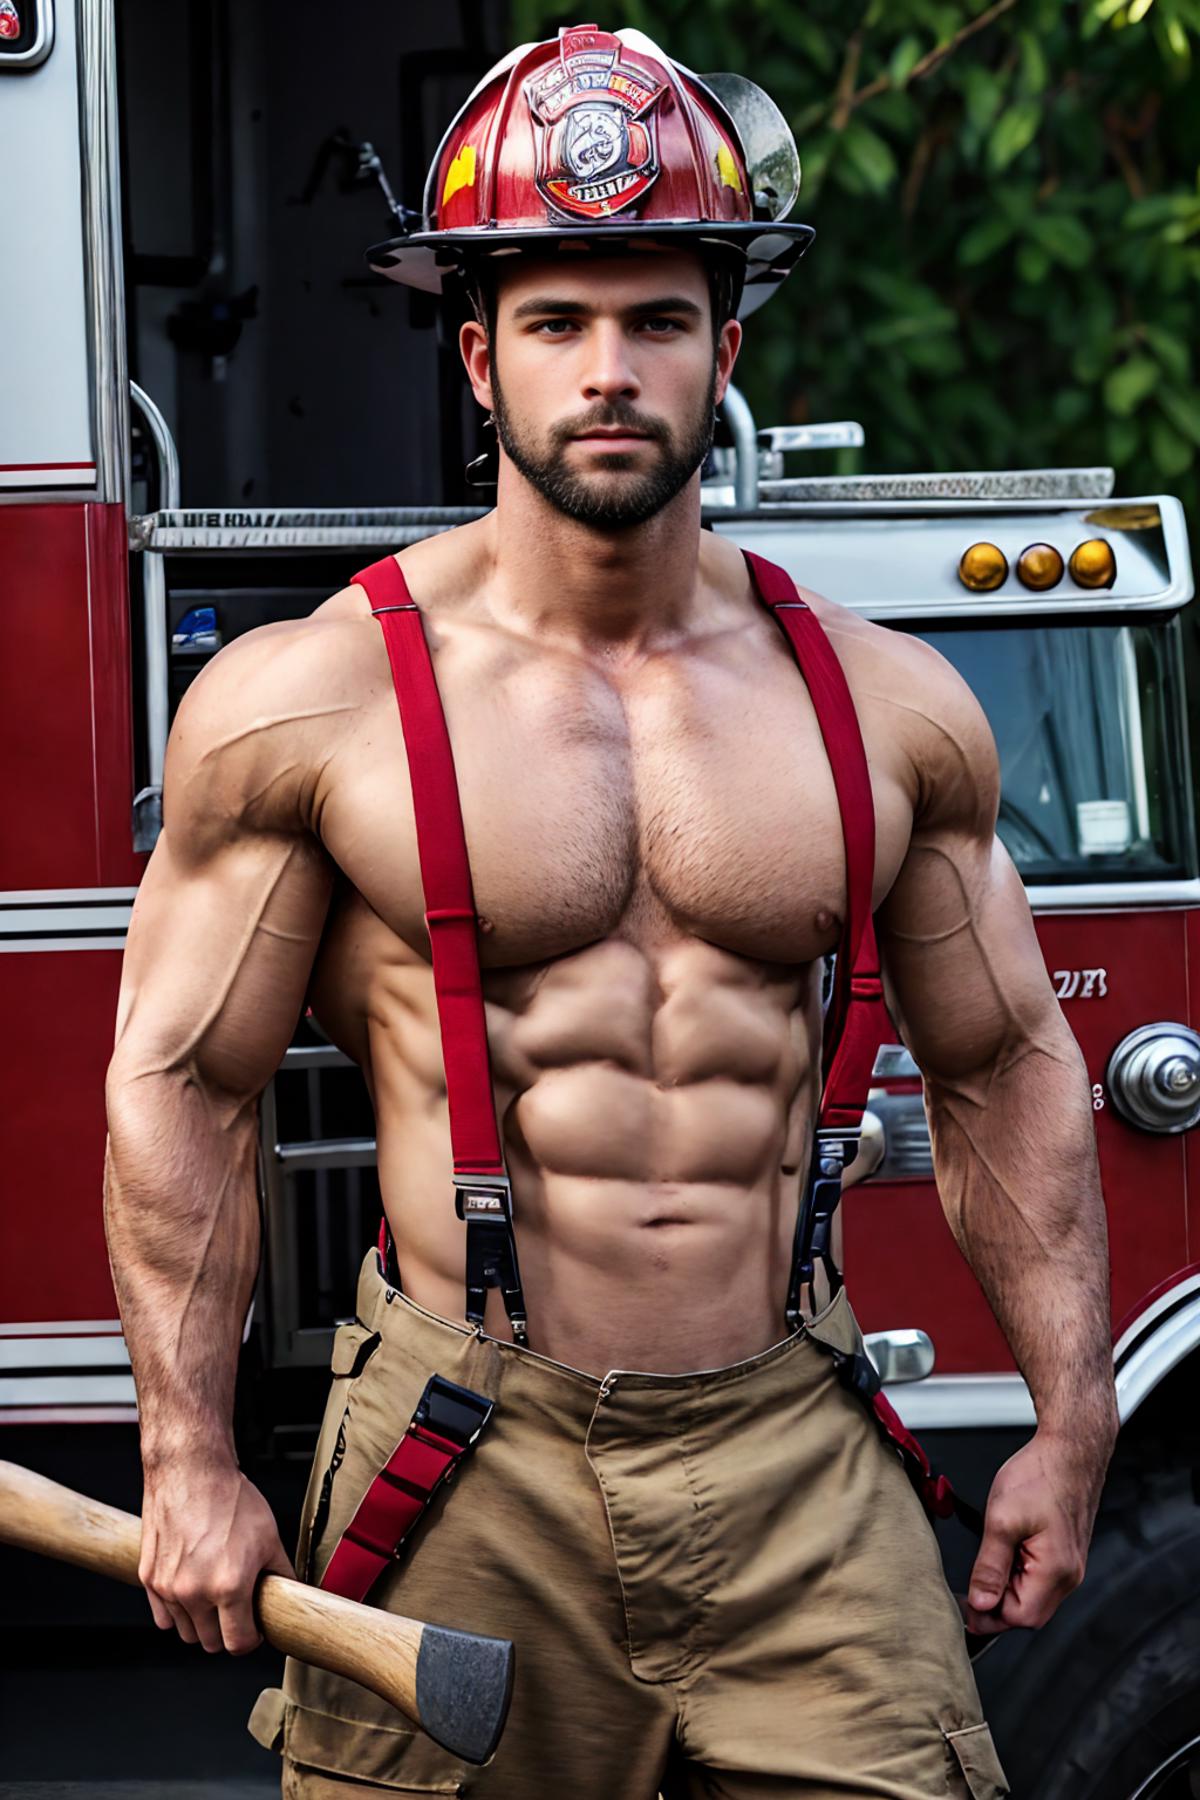 Sexy Firefighter Outfit image by Kairen92